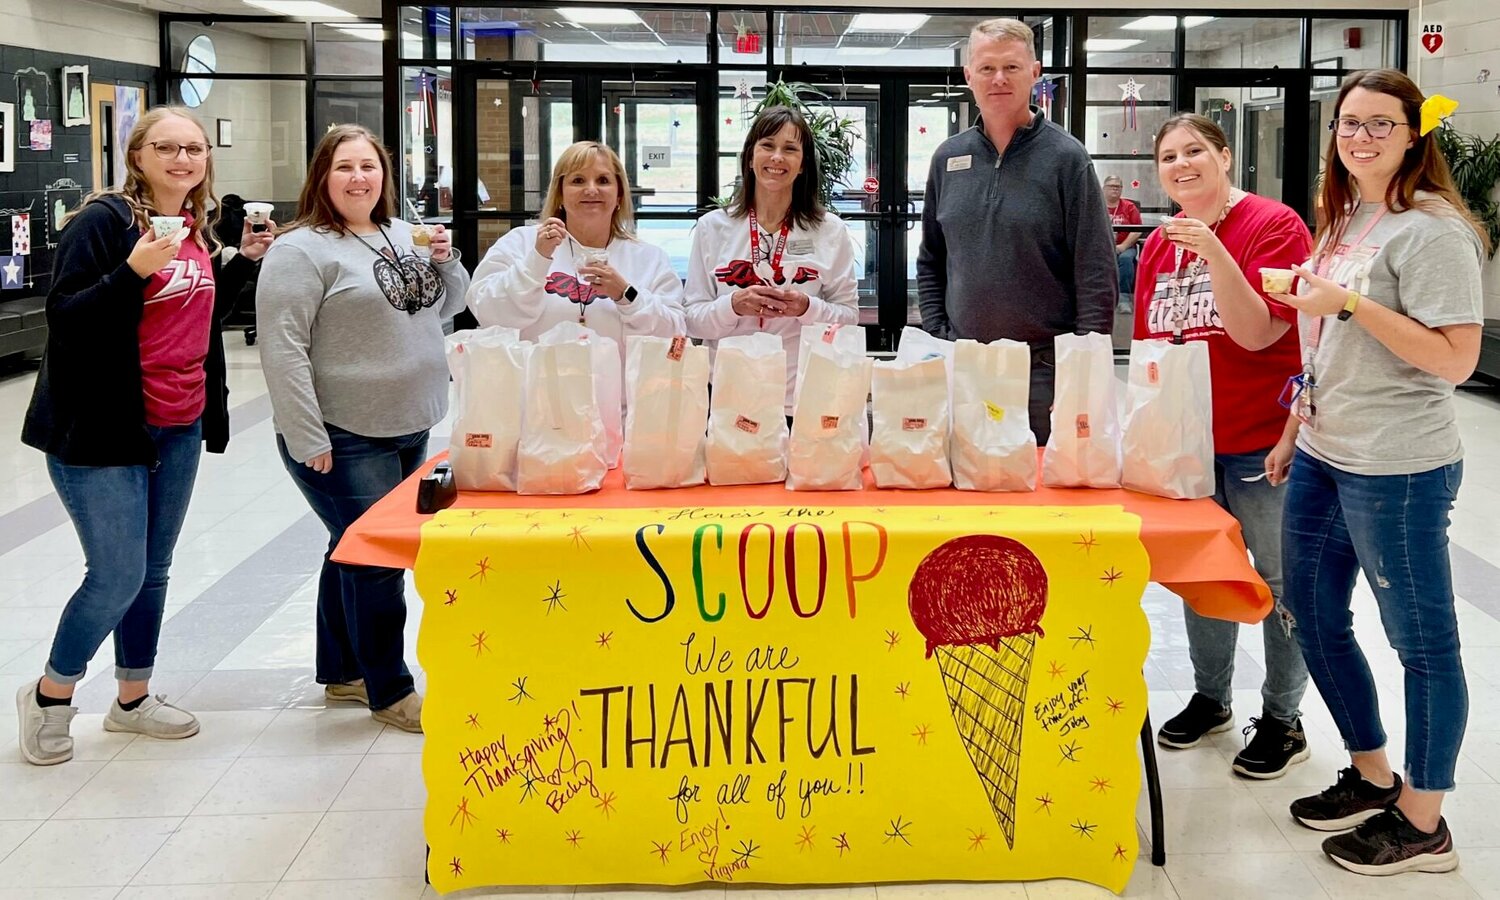 West Plains Elementary principals recently served up “sweet treats for an amazing team,” doling out cups of Spring Dipper ice cream to faculty and staff, shared school district Communications Director Lana Snodgras. “Here’s the scoop: We are incredibly thankful for each of you,” she added. From left: paraprofessional Samantha Wichern, preschool teacher Hannah Beaulieu, third grade teacher Angie Hunt, Principal Becky Hutchinson, Assistant Principal Joby Steele, fourth grade teacher Haley Falterman and teacher Anna Collins.